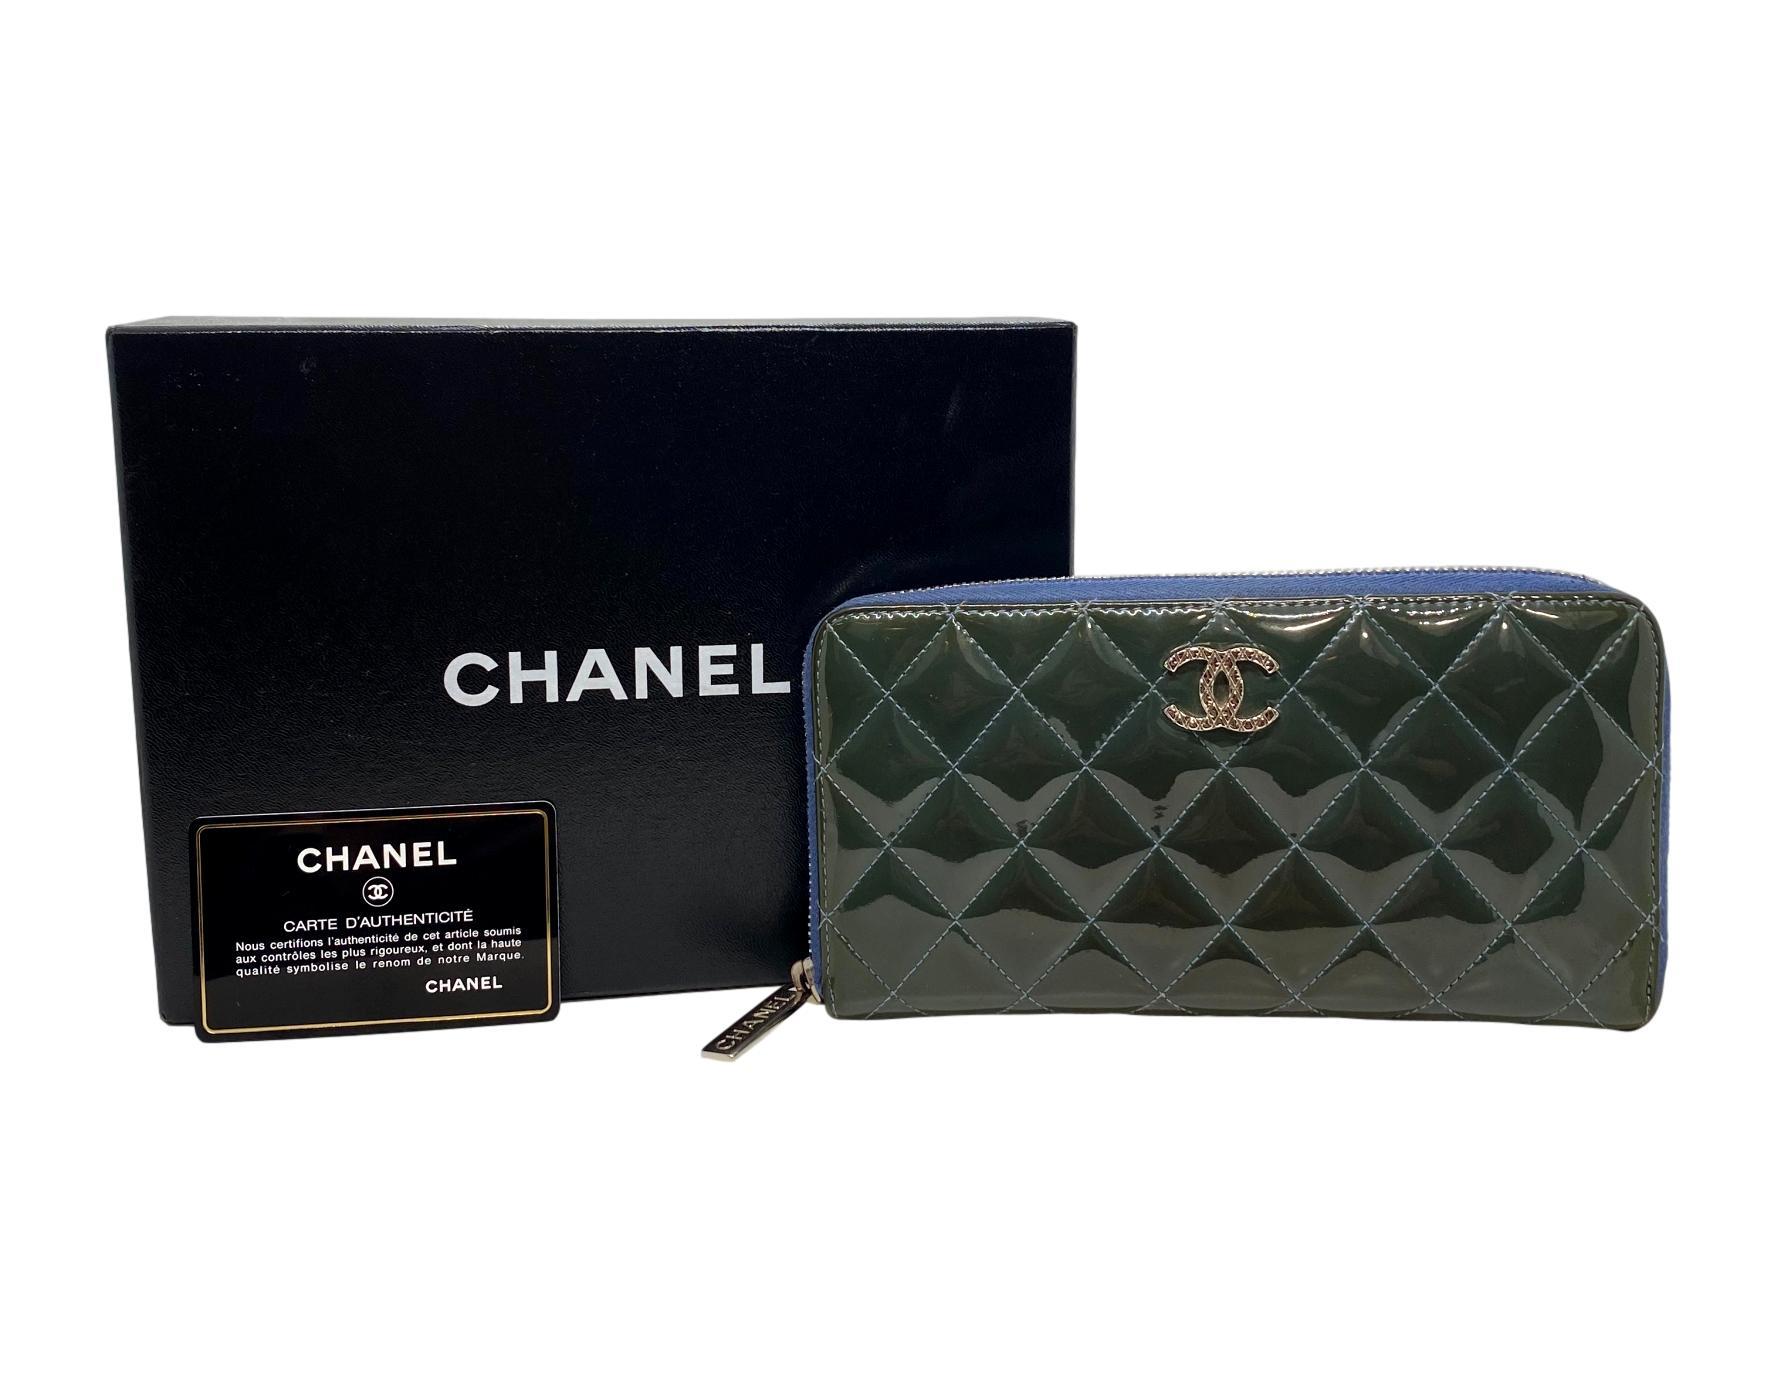 Chanel Brilliant Deep Marine Bi-color Patent Lambskin Leather Gusset Zip Wallet, 2011 - 2012. This classic Large Gusset zip wallet comes in iconic hand quilted patent lambskin leather in the rare deep marine coloration. Adorned with silver toned